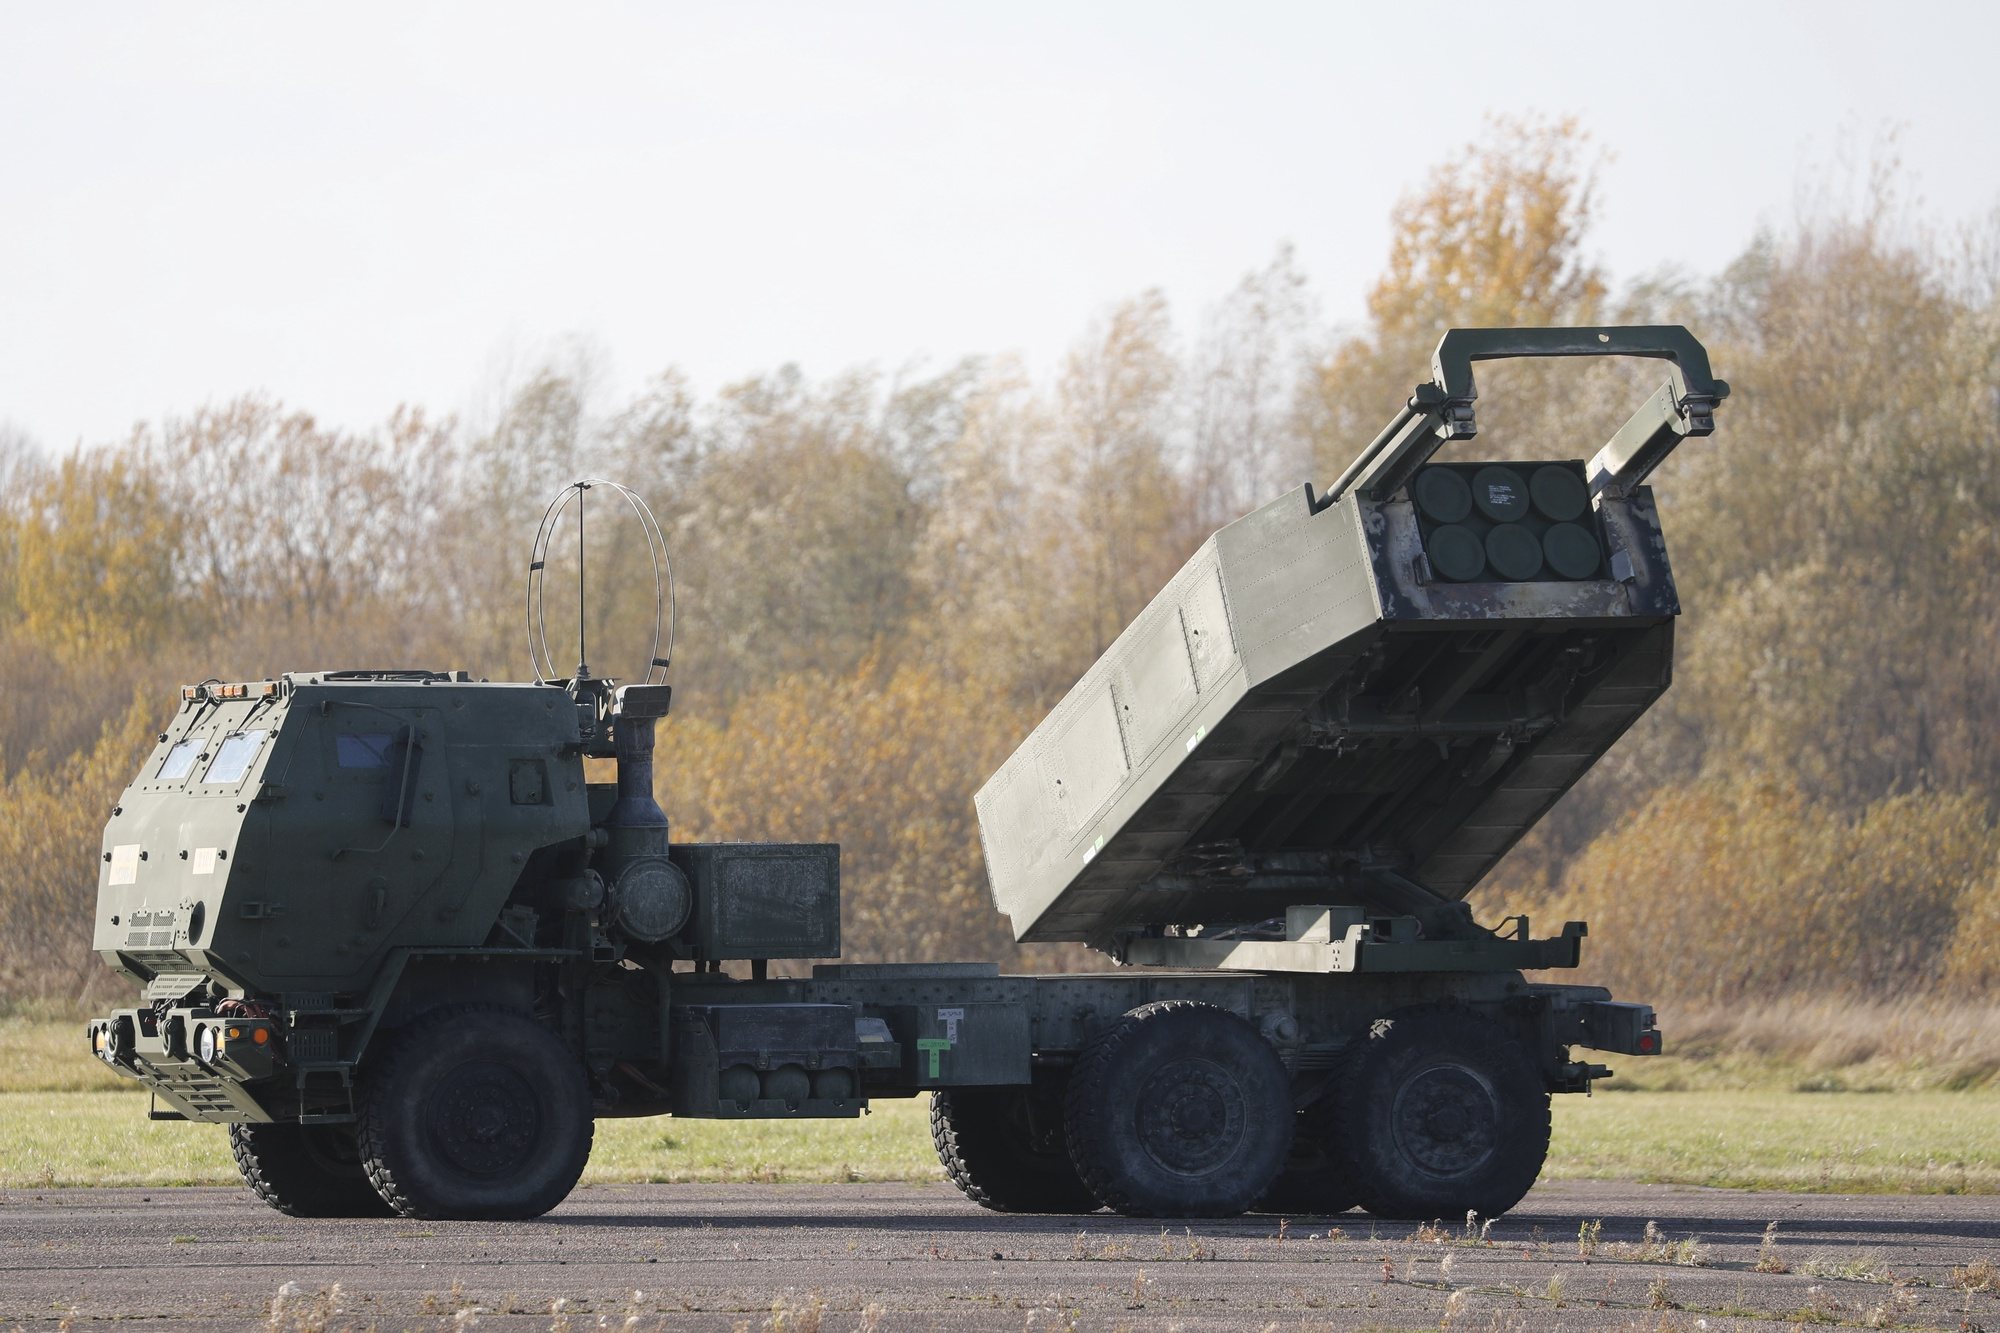 epa09545432 A view of a US High Mobility Artillery Rocket System (HIMARS) during a landing exercise at Spilva airfield in Riga, Latvia, 25 October 2021. The US Air Force special operation aircraft MC-130J Commando II took part in a landing exercise demonstrating the rapid delivery and deployment of US Army High Mobility Artillery Rocket System (HIMARS). The aim of the exercise is to demonstrate the collective defense capabilities and the ability of the Allies to quickly deliver fire support capabilities to Latvia, providing support to the National Armed Forces in national defense.  EPA/TOMS KALNINS